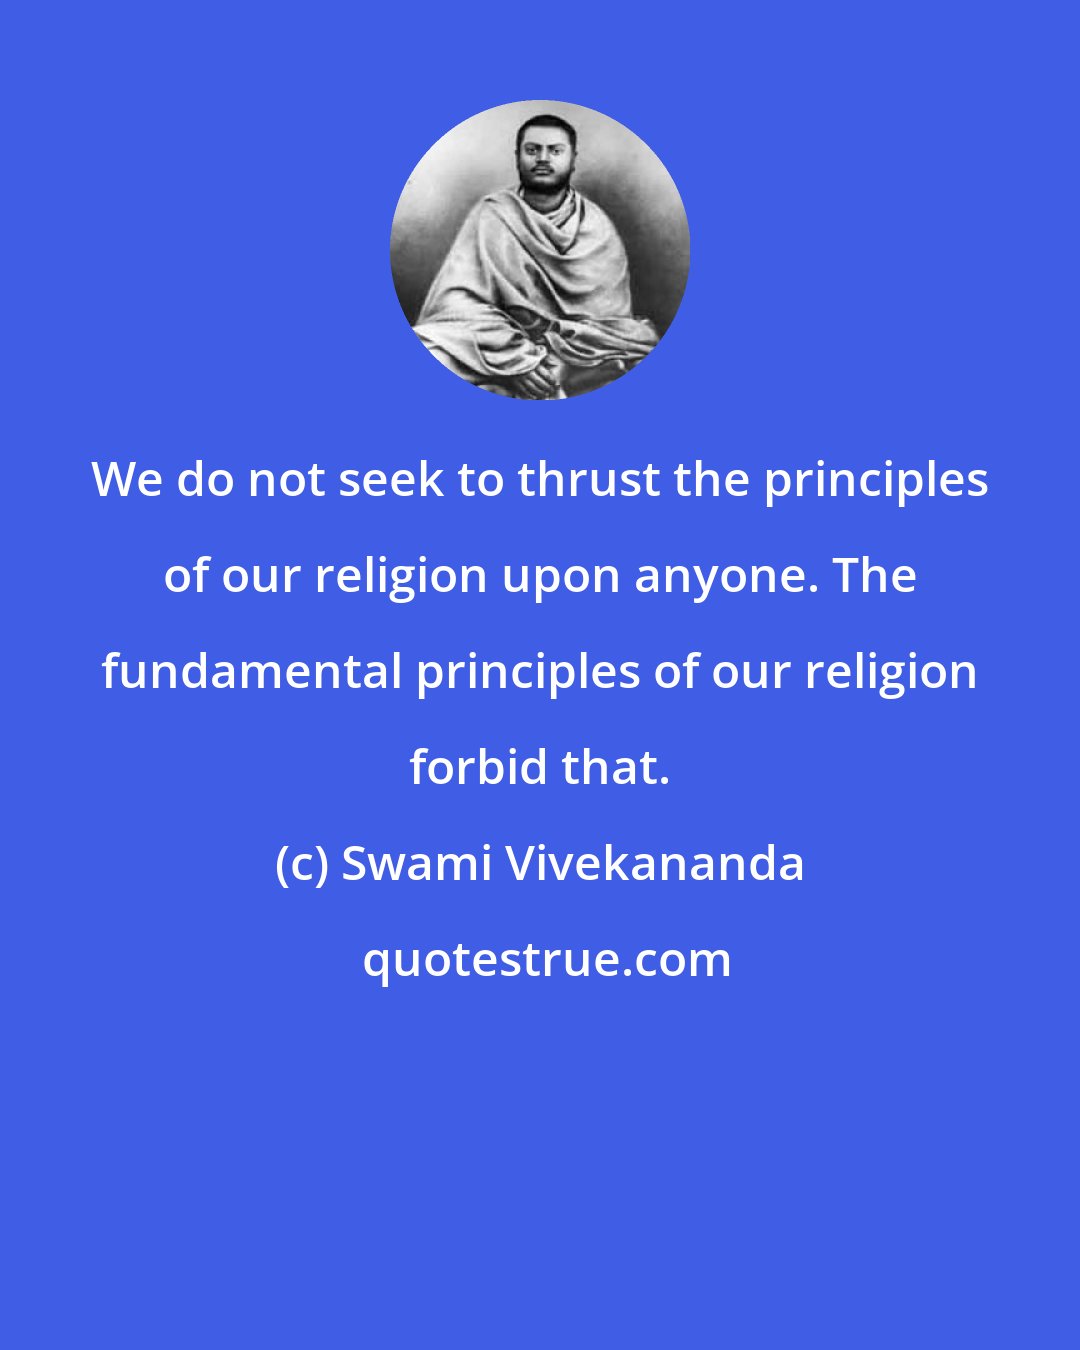 Swami Vivekananda: We do not seek to thrust the principles of our religion upon anyone. The fundamental principles of our religion forbid that.